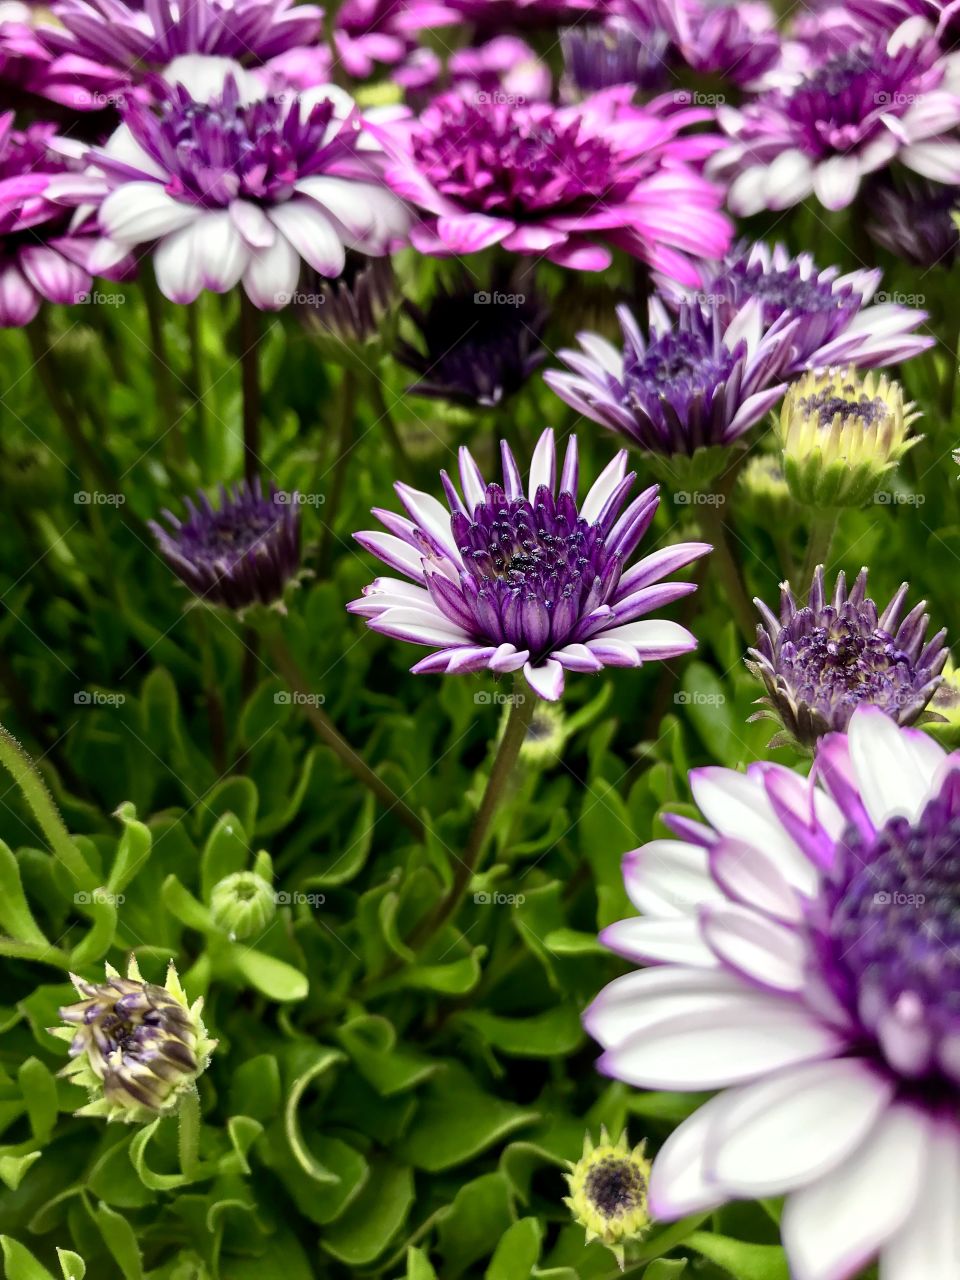 Osteospermum, is a genus of flowering plants belonging to the Calenduleae, one of the smaller tribes of the sunflower/daisy family Asteraceae. 1/2